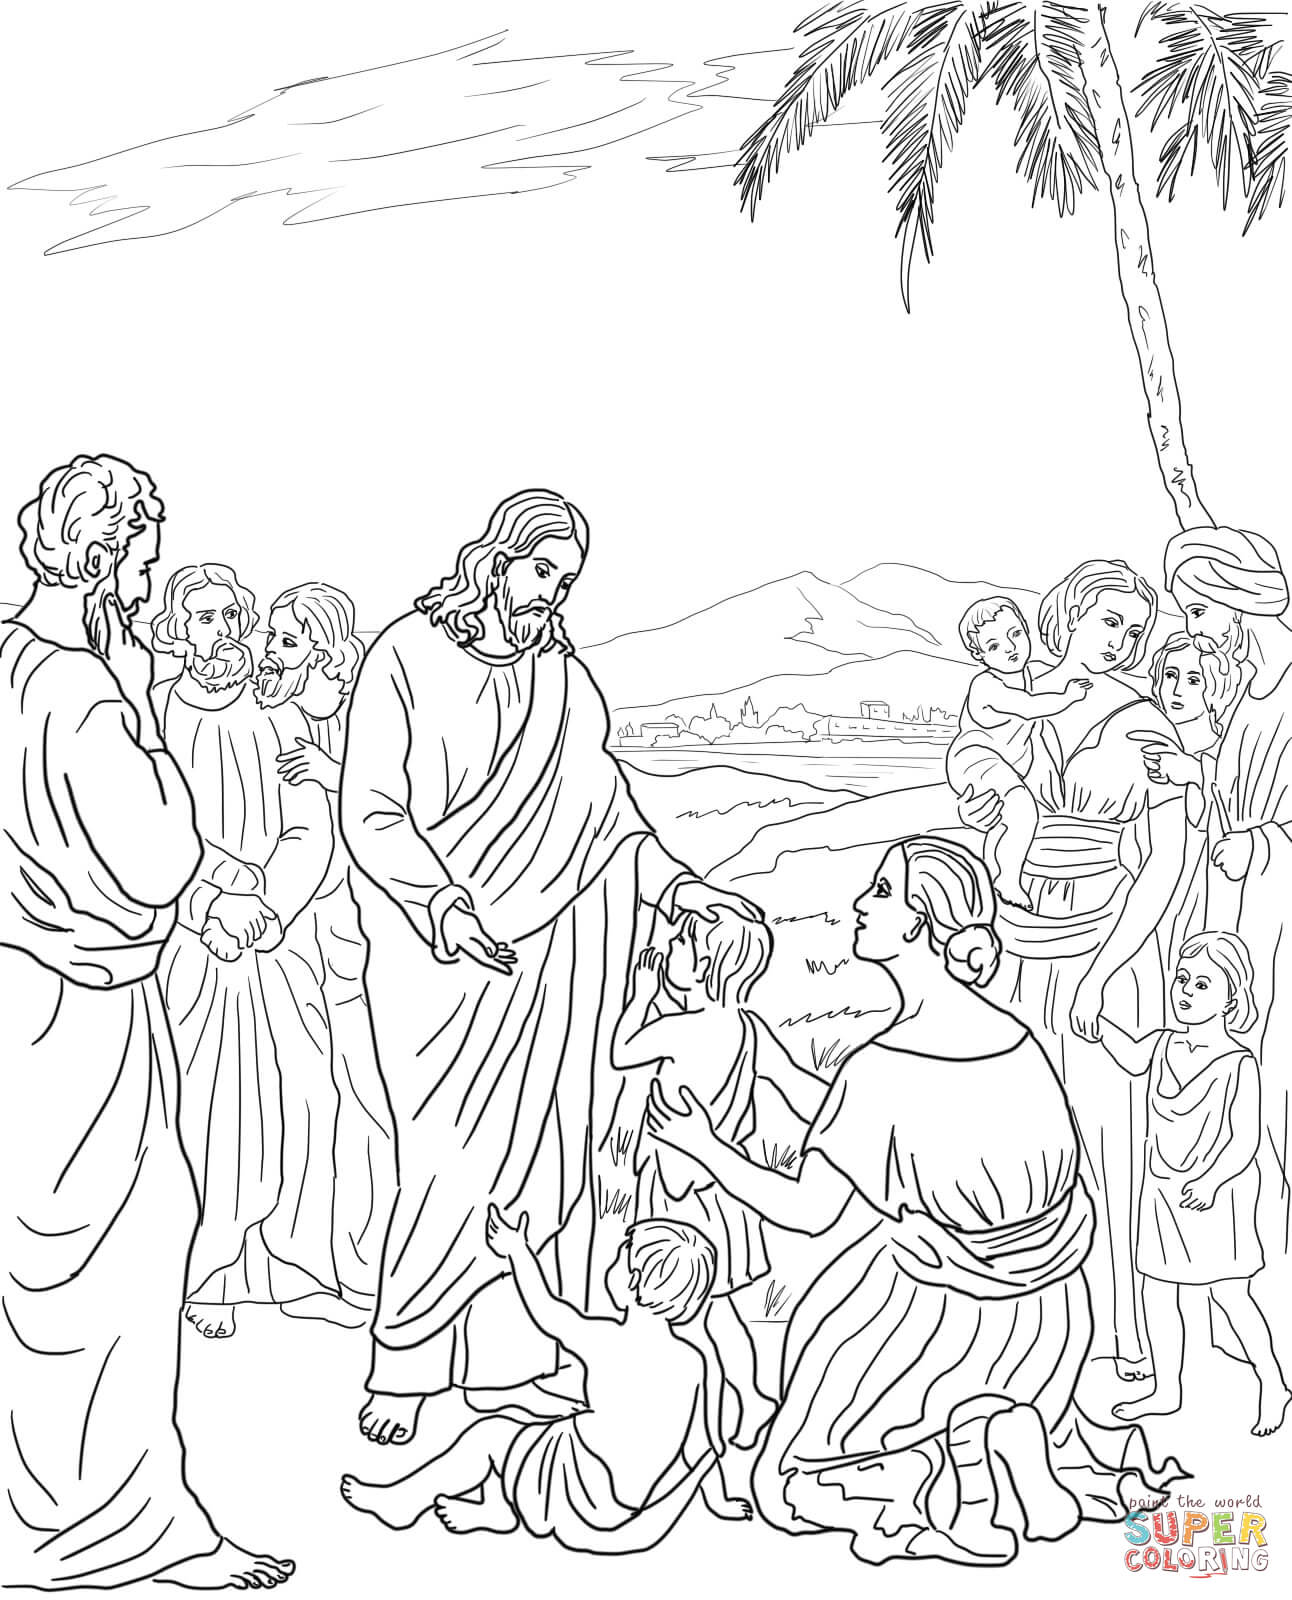 Jesus Blesses the Children coloring page | Free Printable Coloring ...